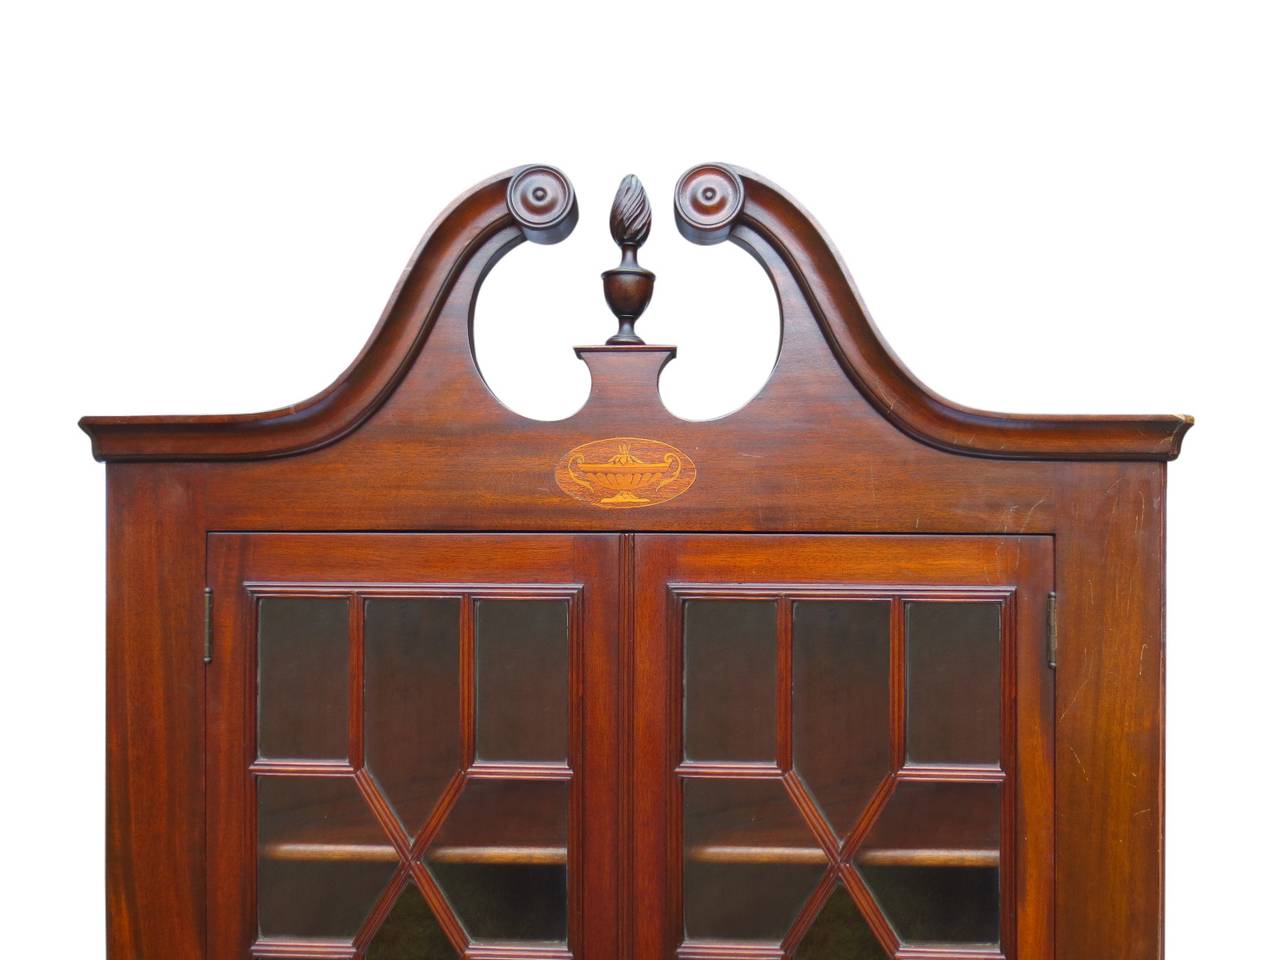 Edwardian Inlaid Mahogany Corner Cabinet In Excellent Condition For Sale In Holliston, MA